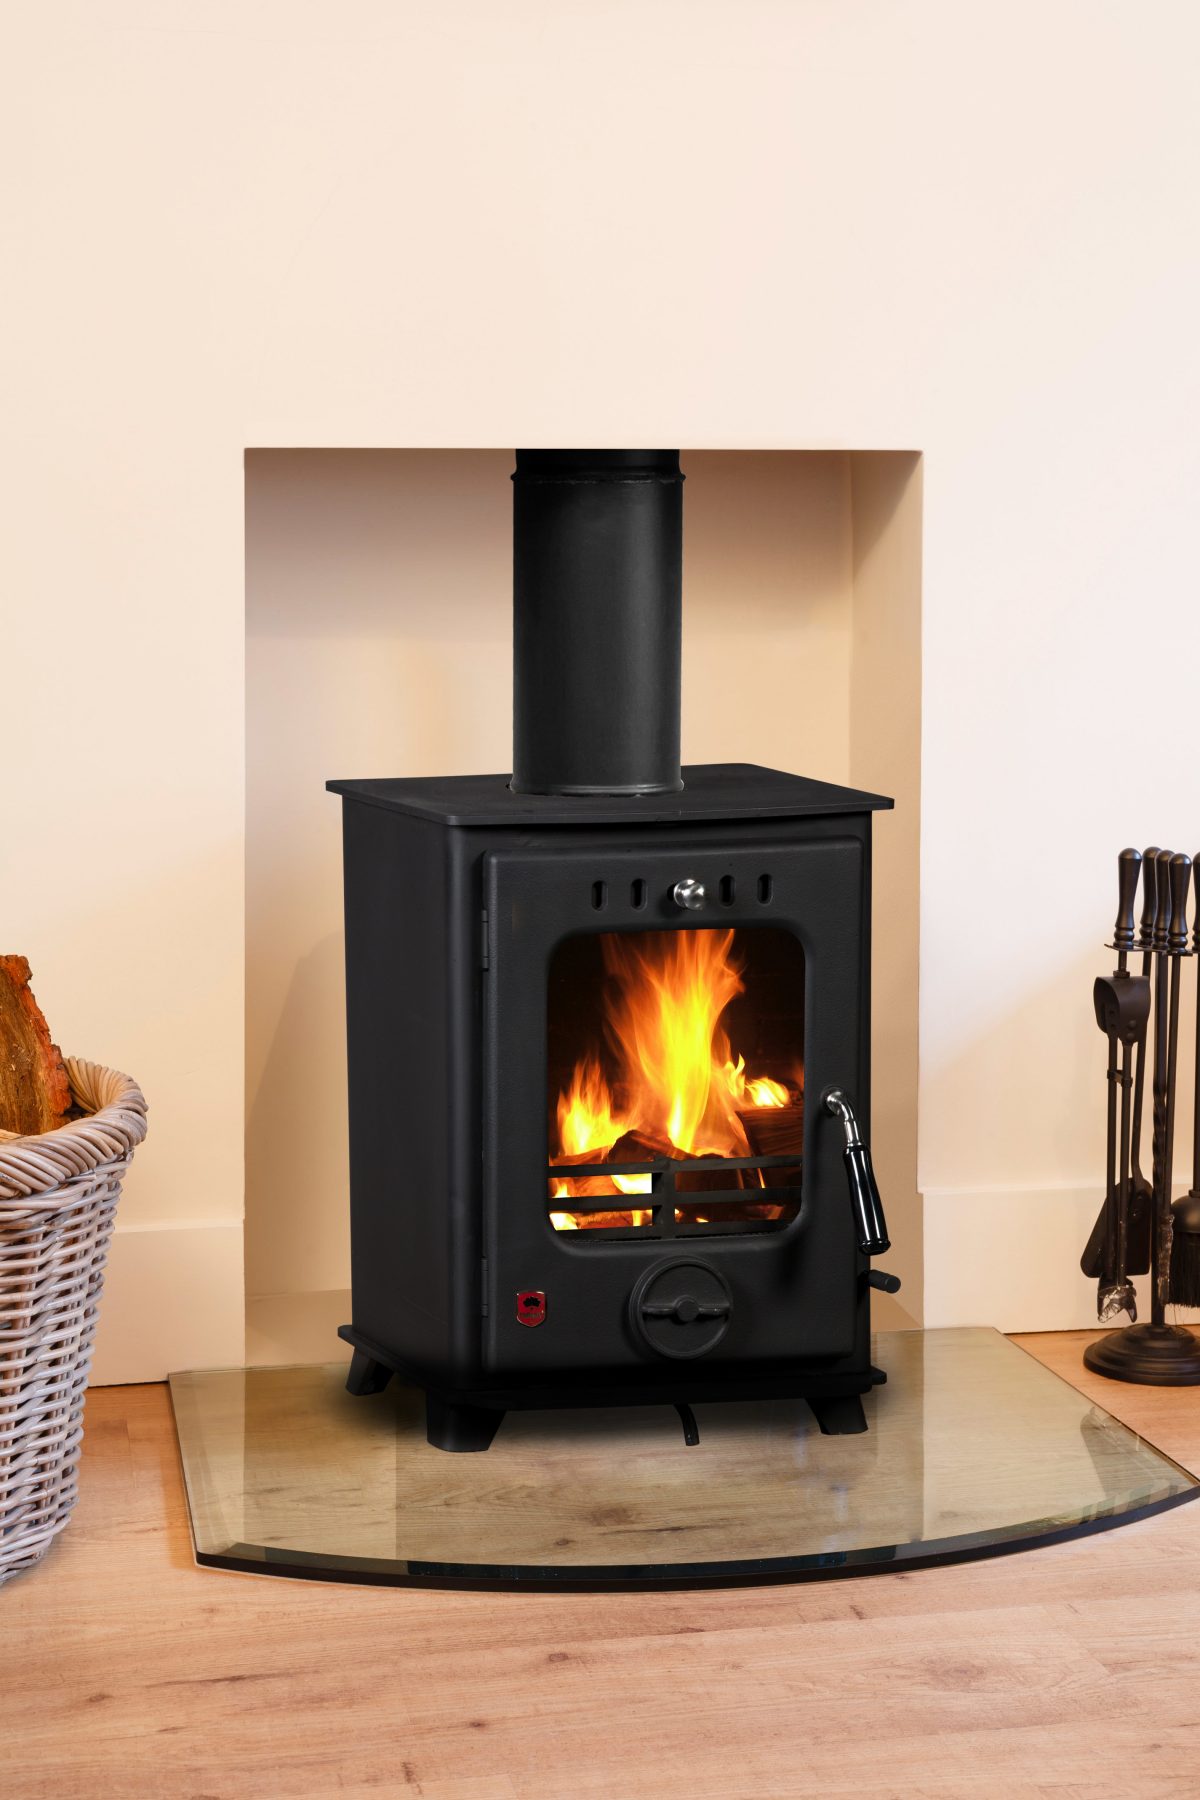 Shaw 5KW Steel Solid Fuel Stove